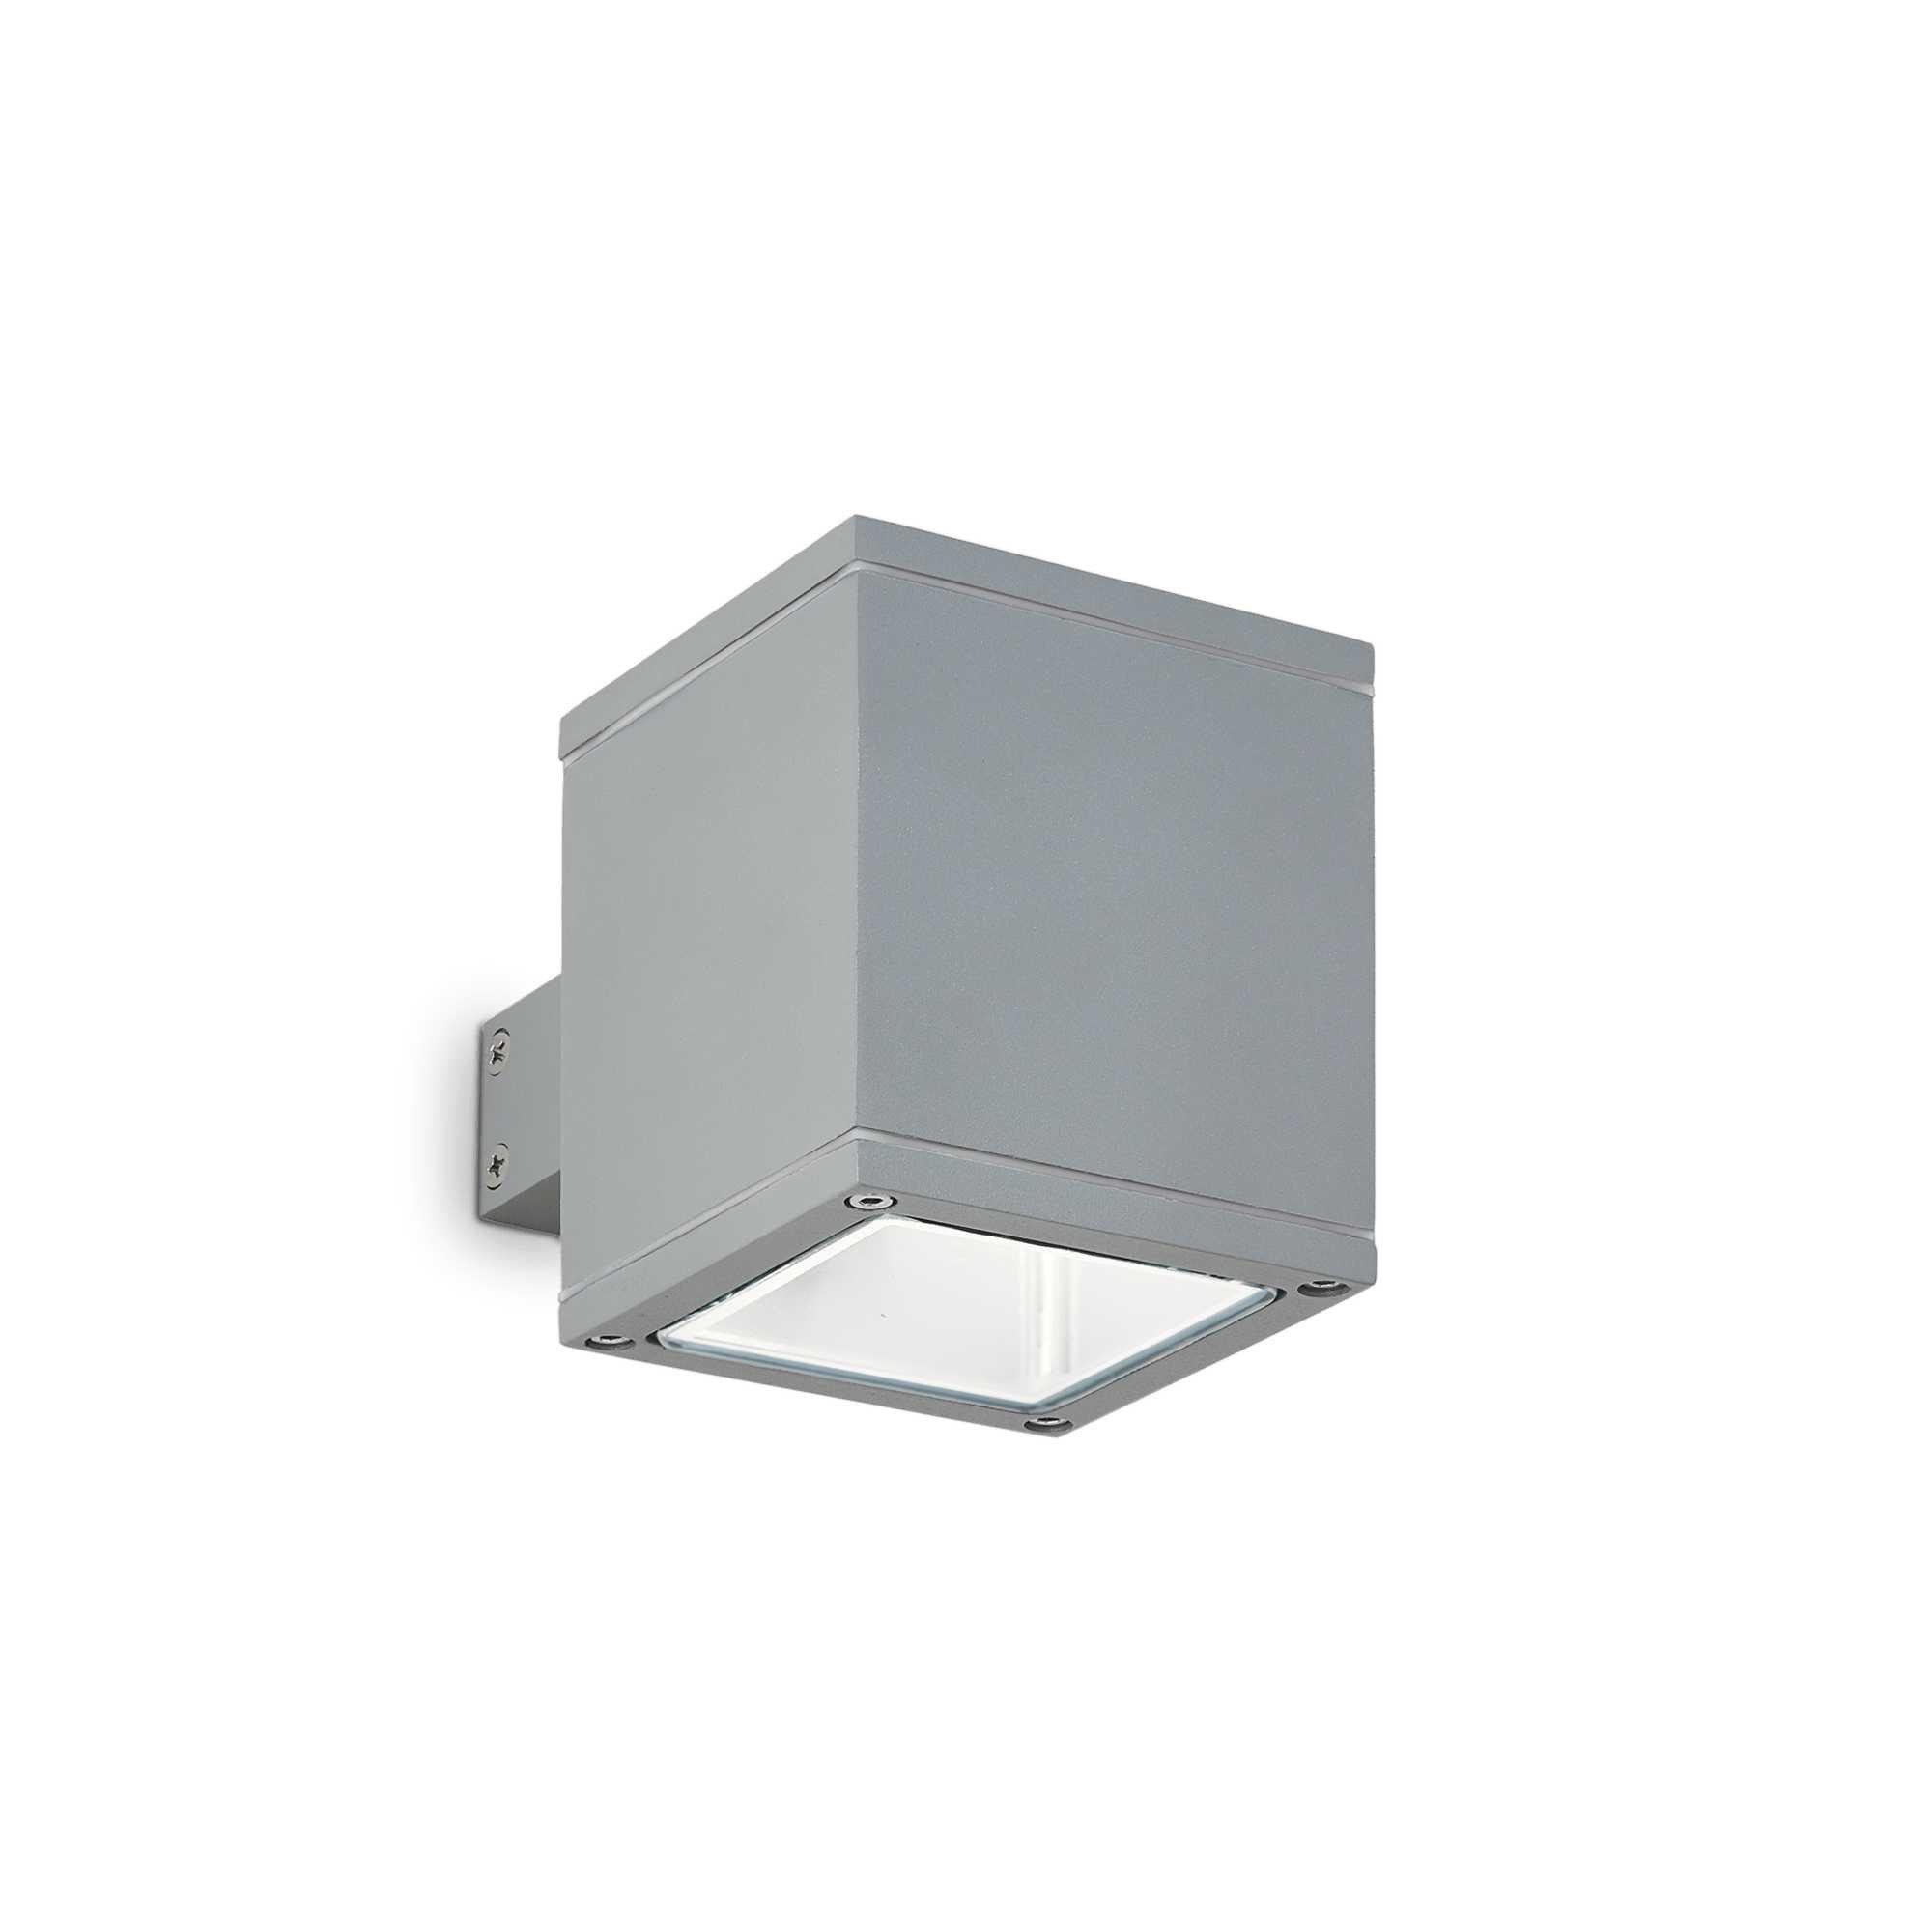 Snif Square 1 Light Outdoor Up Down Wall Light Grey Putty IP44 G9